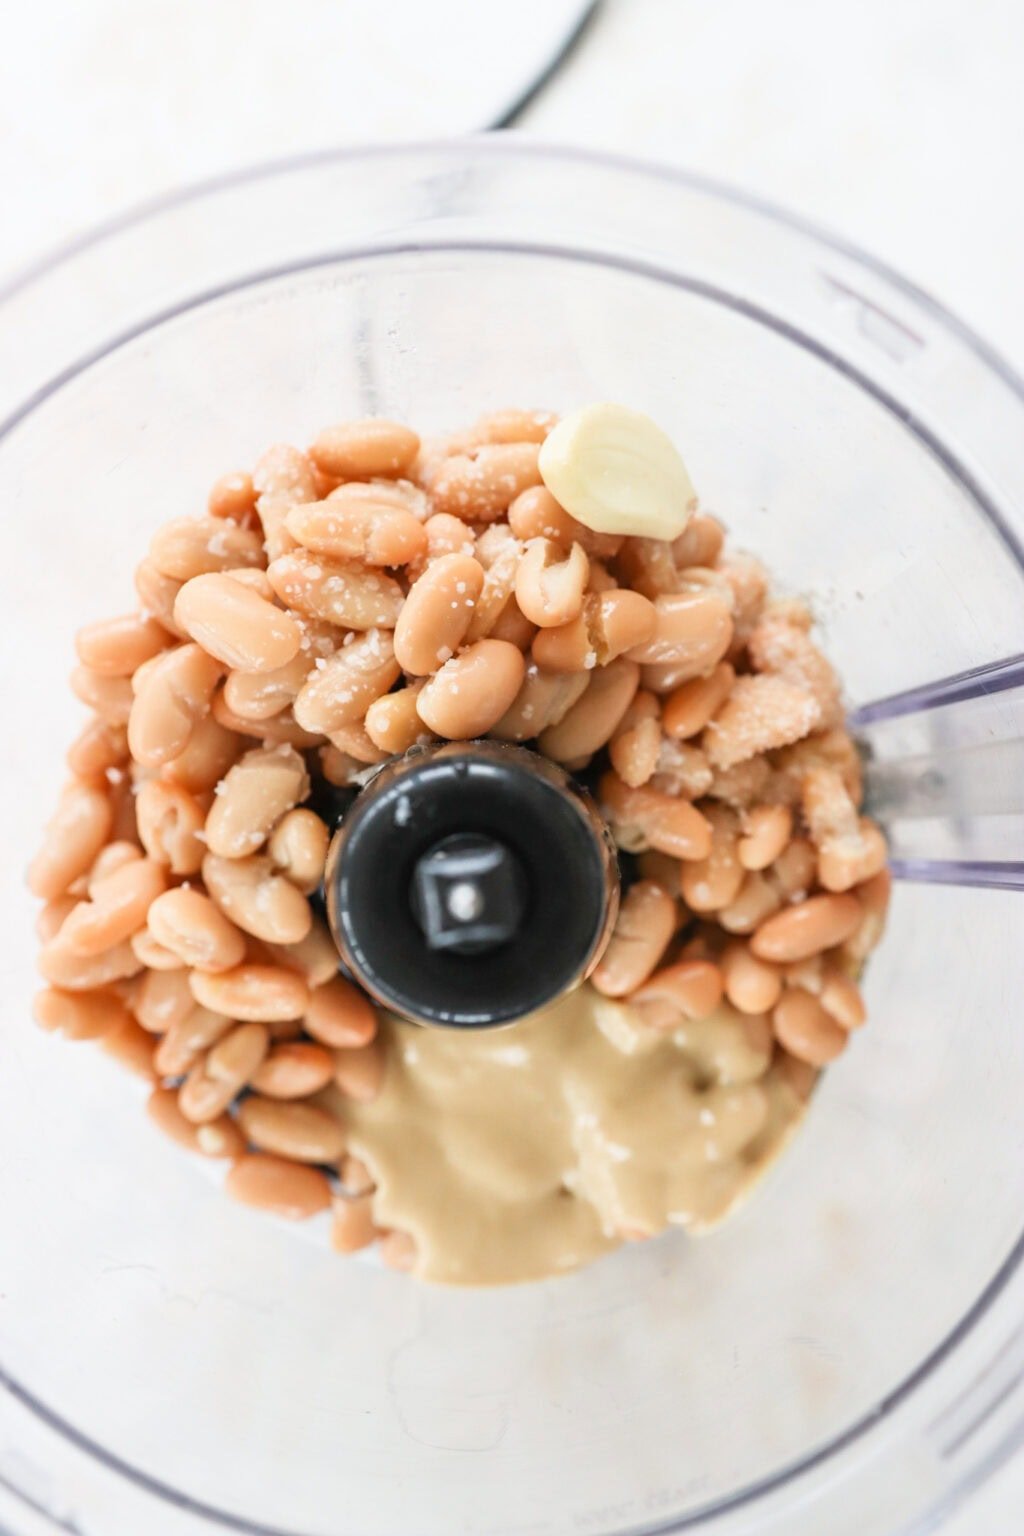 Ingredients for Super Creamy Vegan White Bean Dip with Cashews unblended in a food processor, including cannellini beans, cashews, extra virgin olive oil, salt, lemon juice